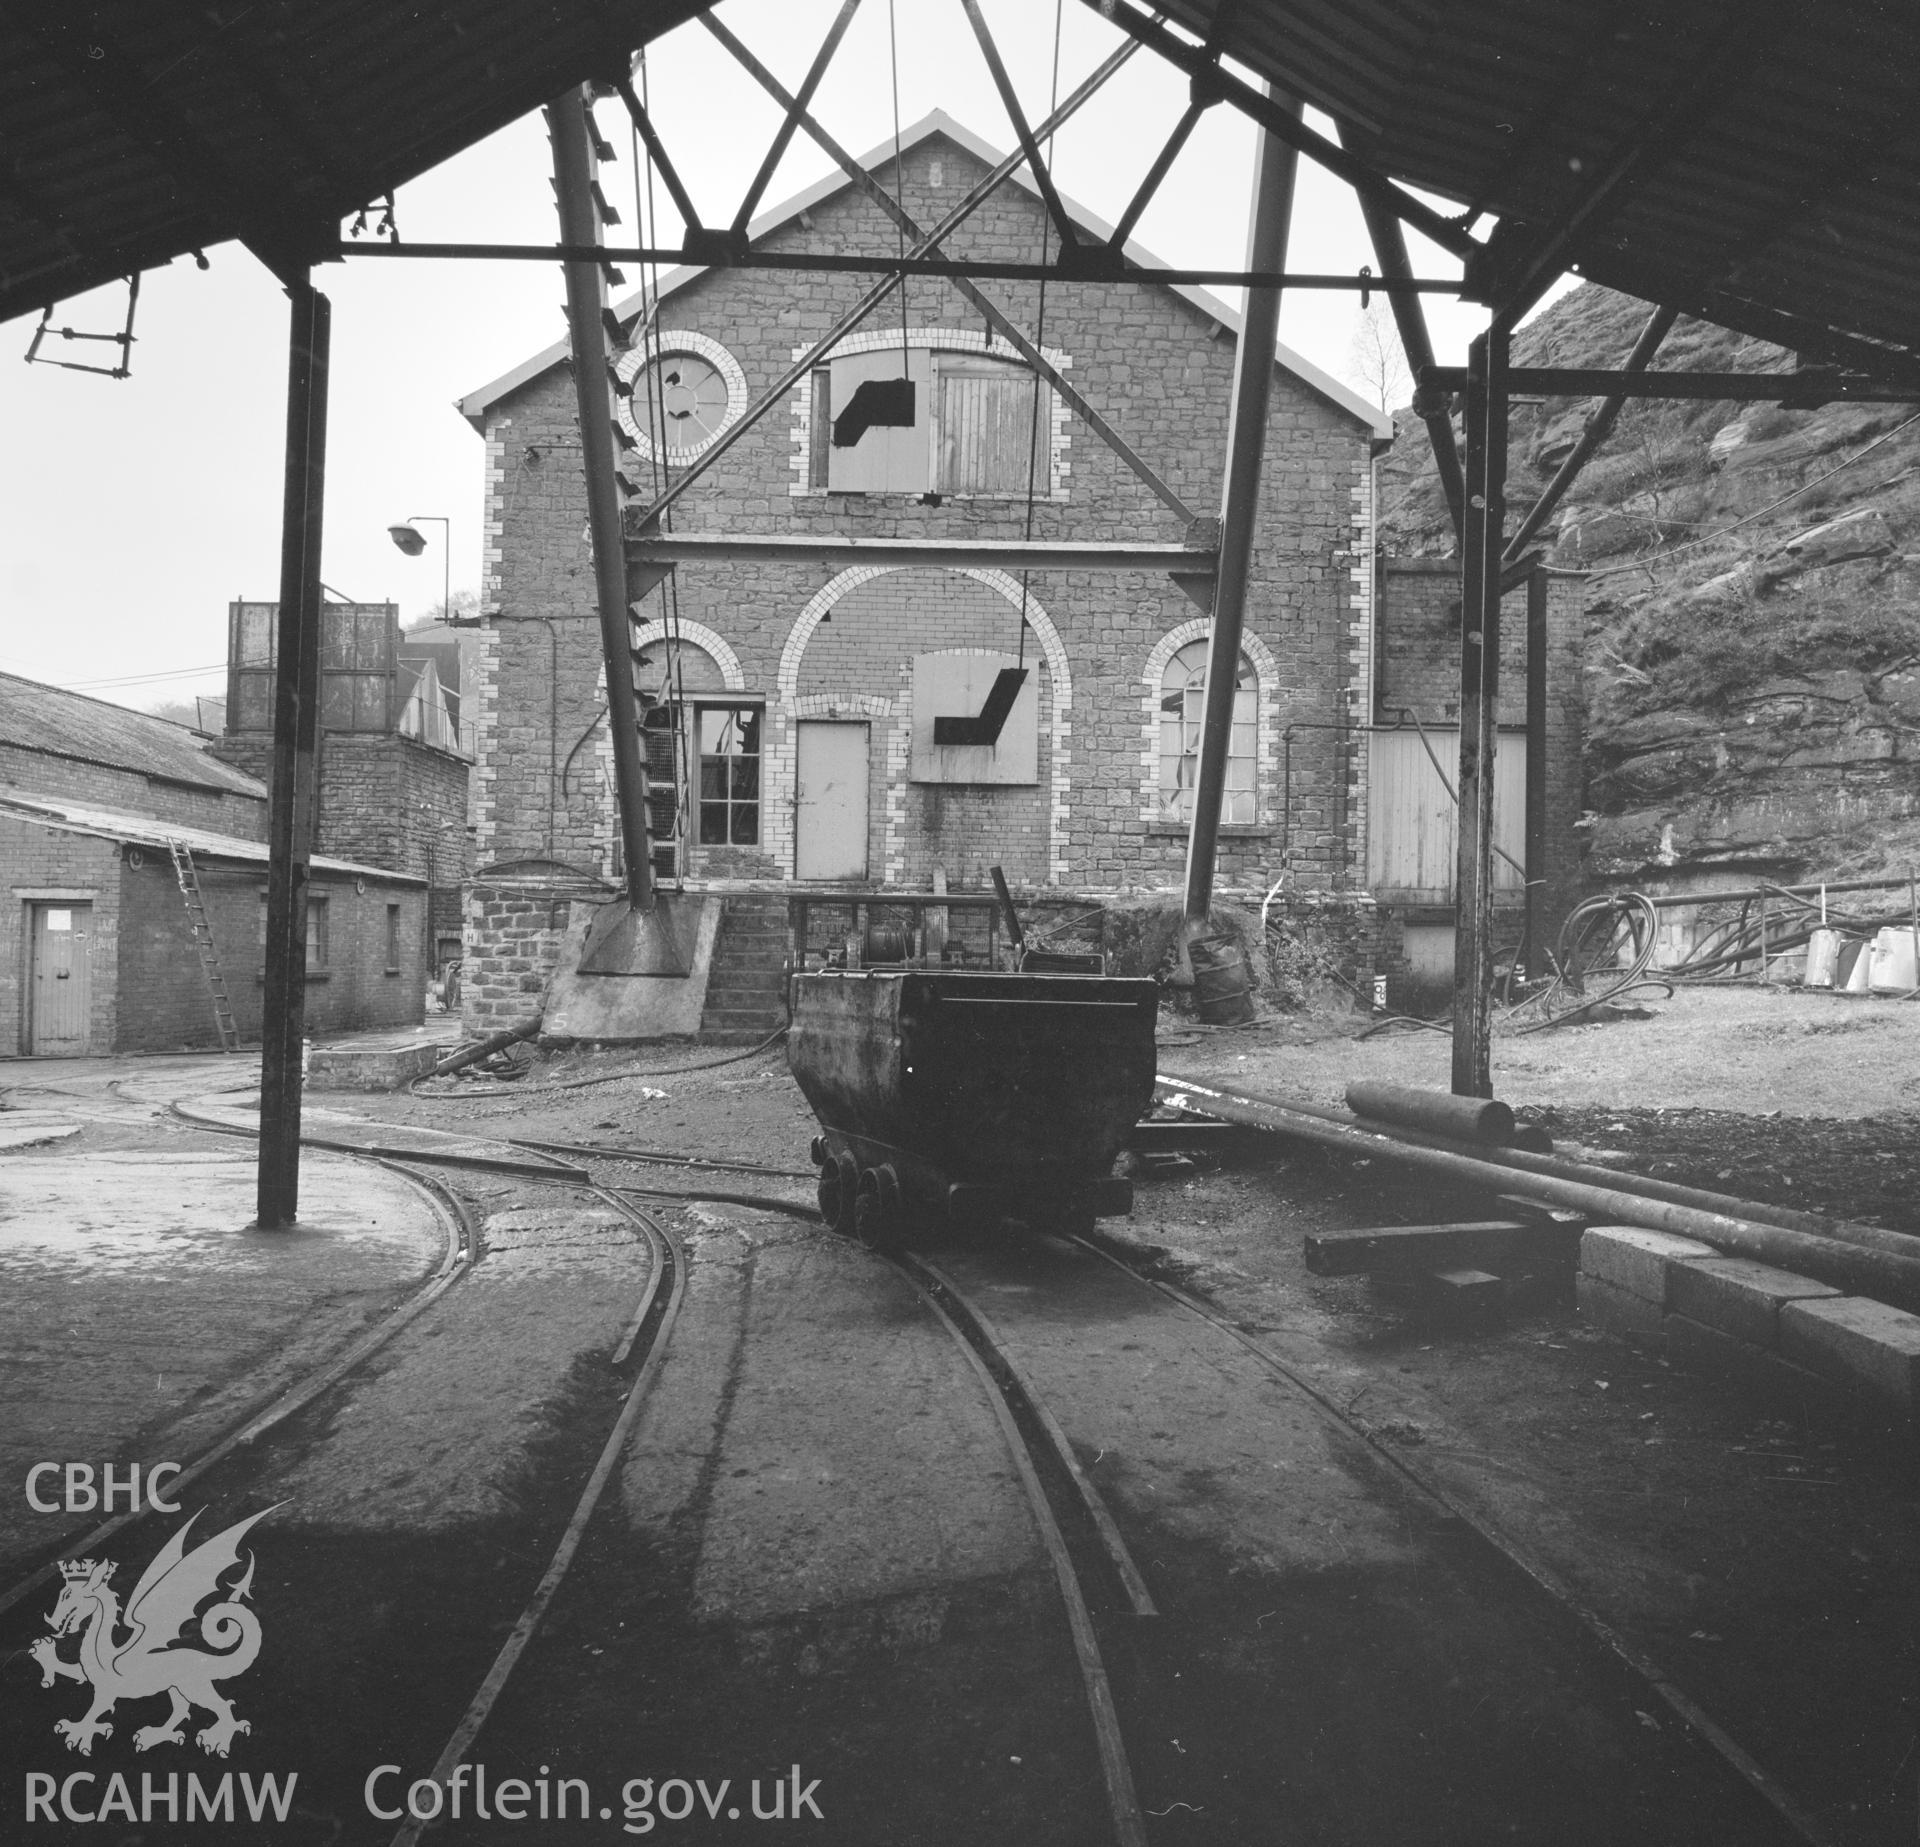 Digital copy of an acetate negative showing Blaenserchan Colliery - End view of winding engine house, from the John Cornwell Collection.